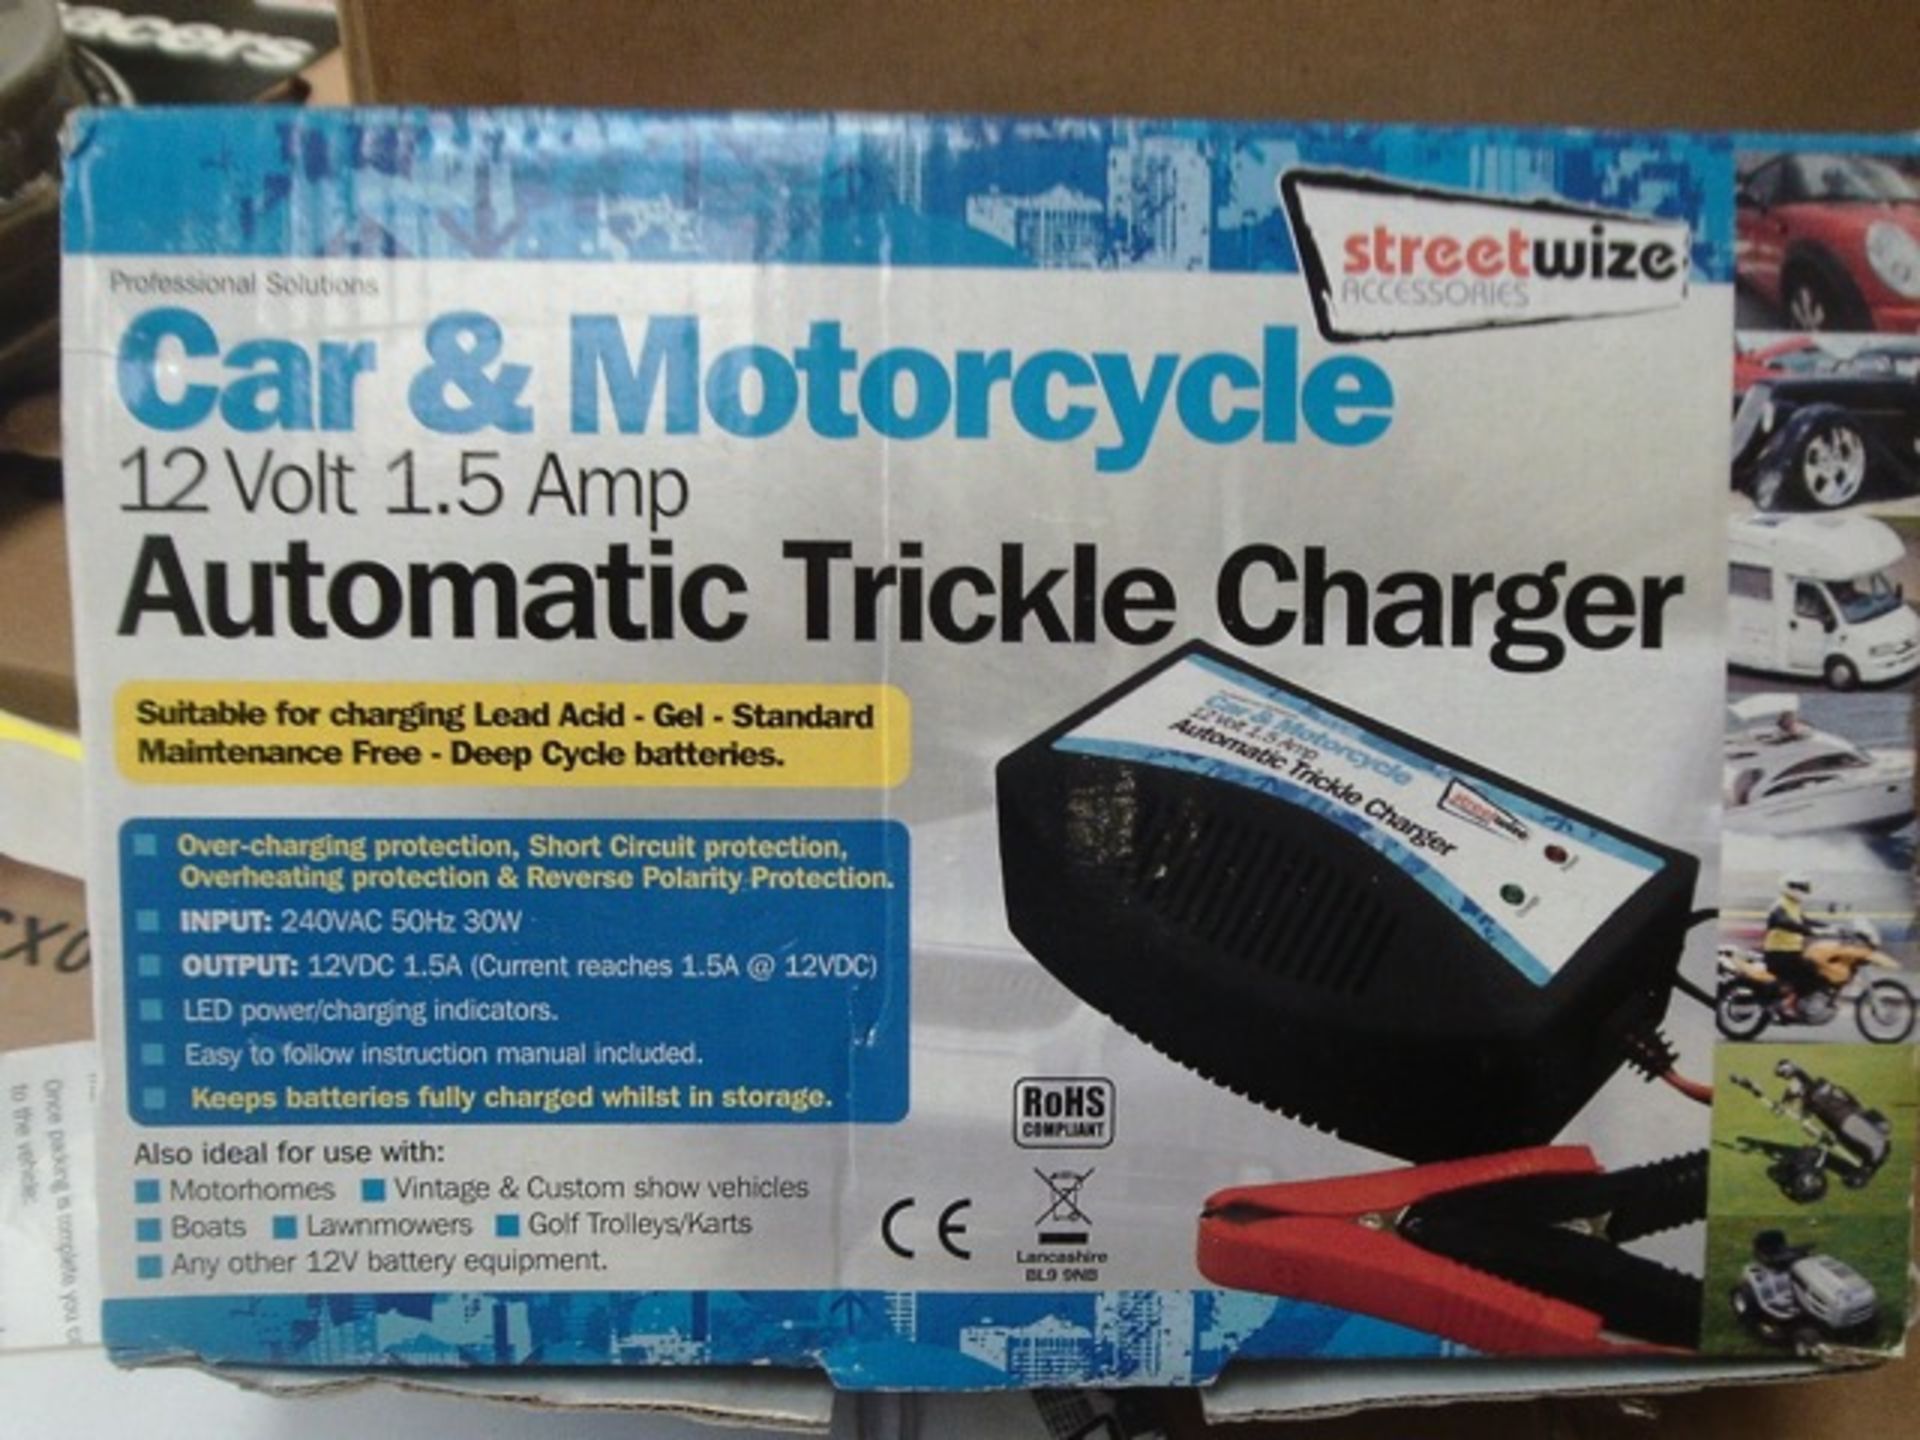 5pcs x Streetwise 12Volt 1.5Amp Auctomatic trickle charger - rrp 19.99 each ( there are 5 items in